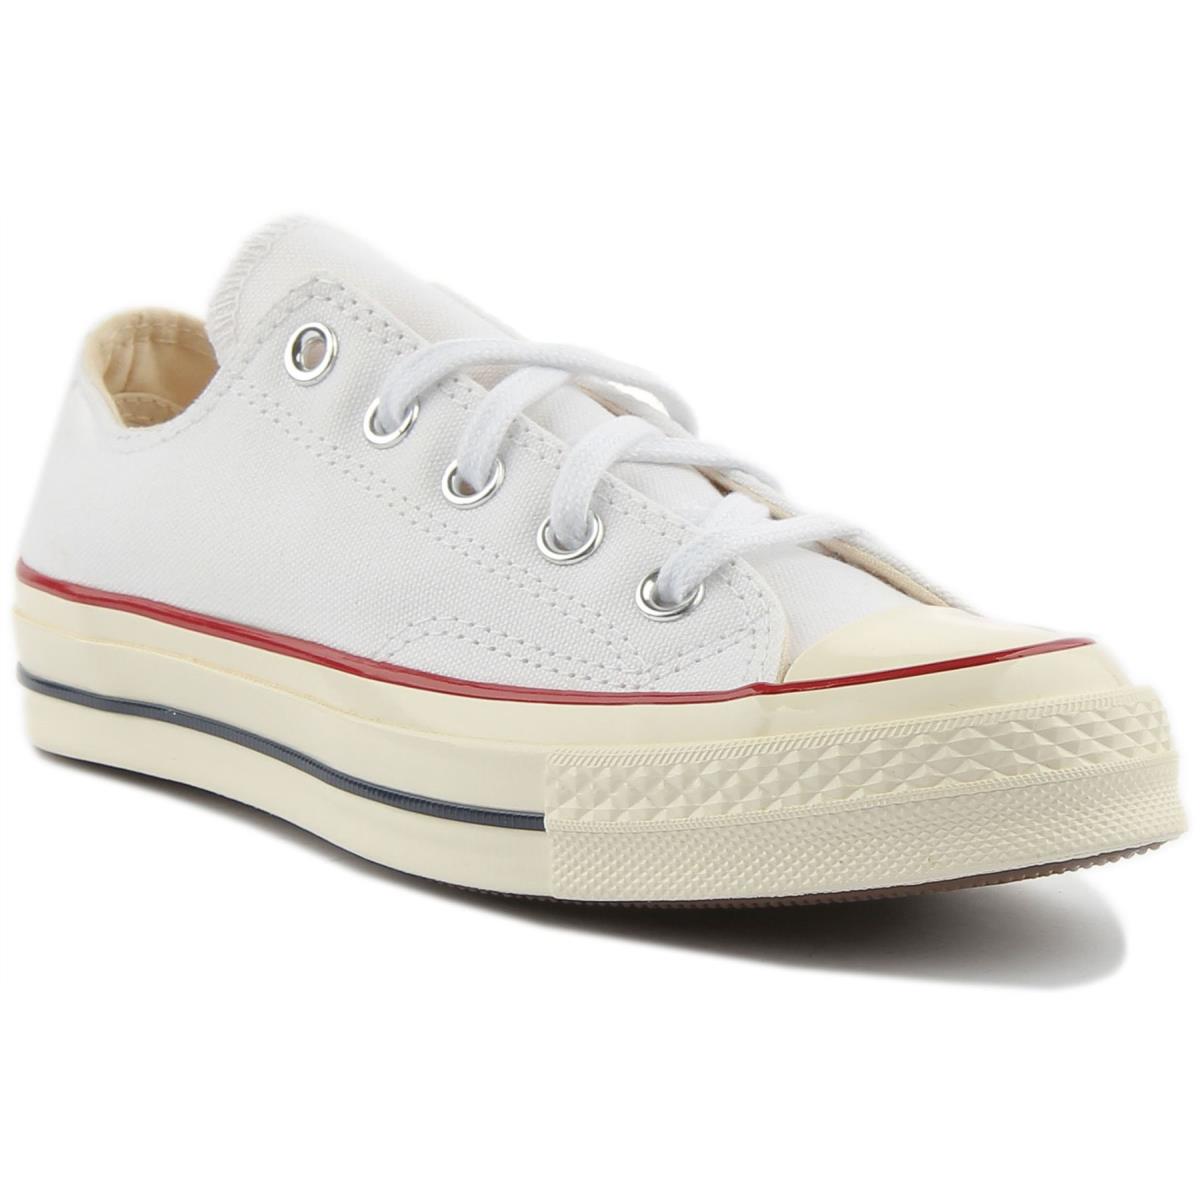 Converse 162065 Chuck 70s Ox Unisex Canvas Low Sneakers In White Size US 3 - 12 WHITE